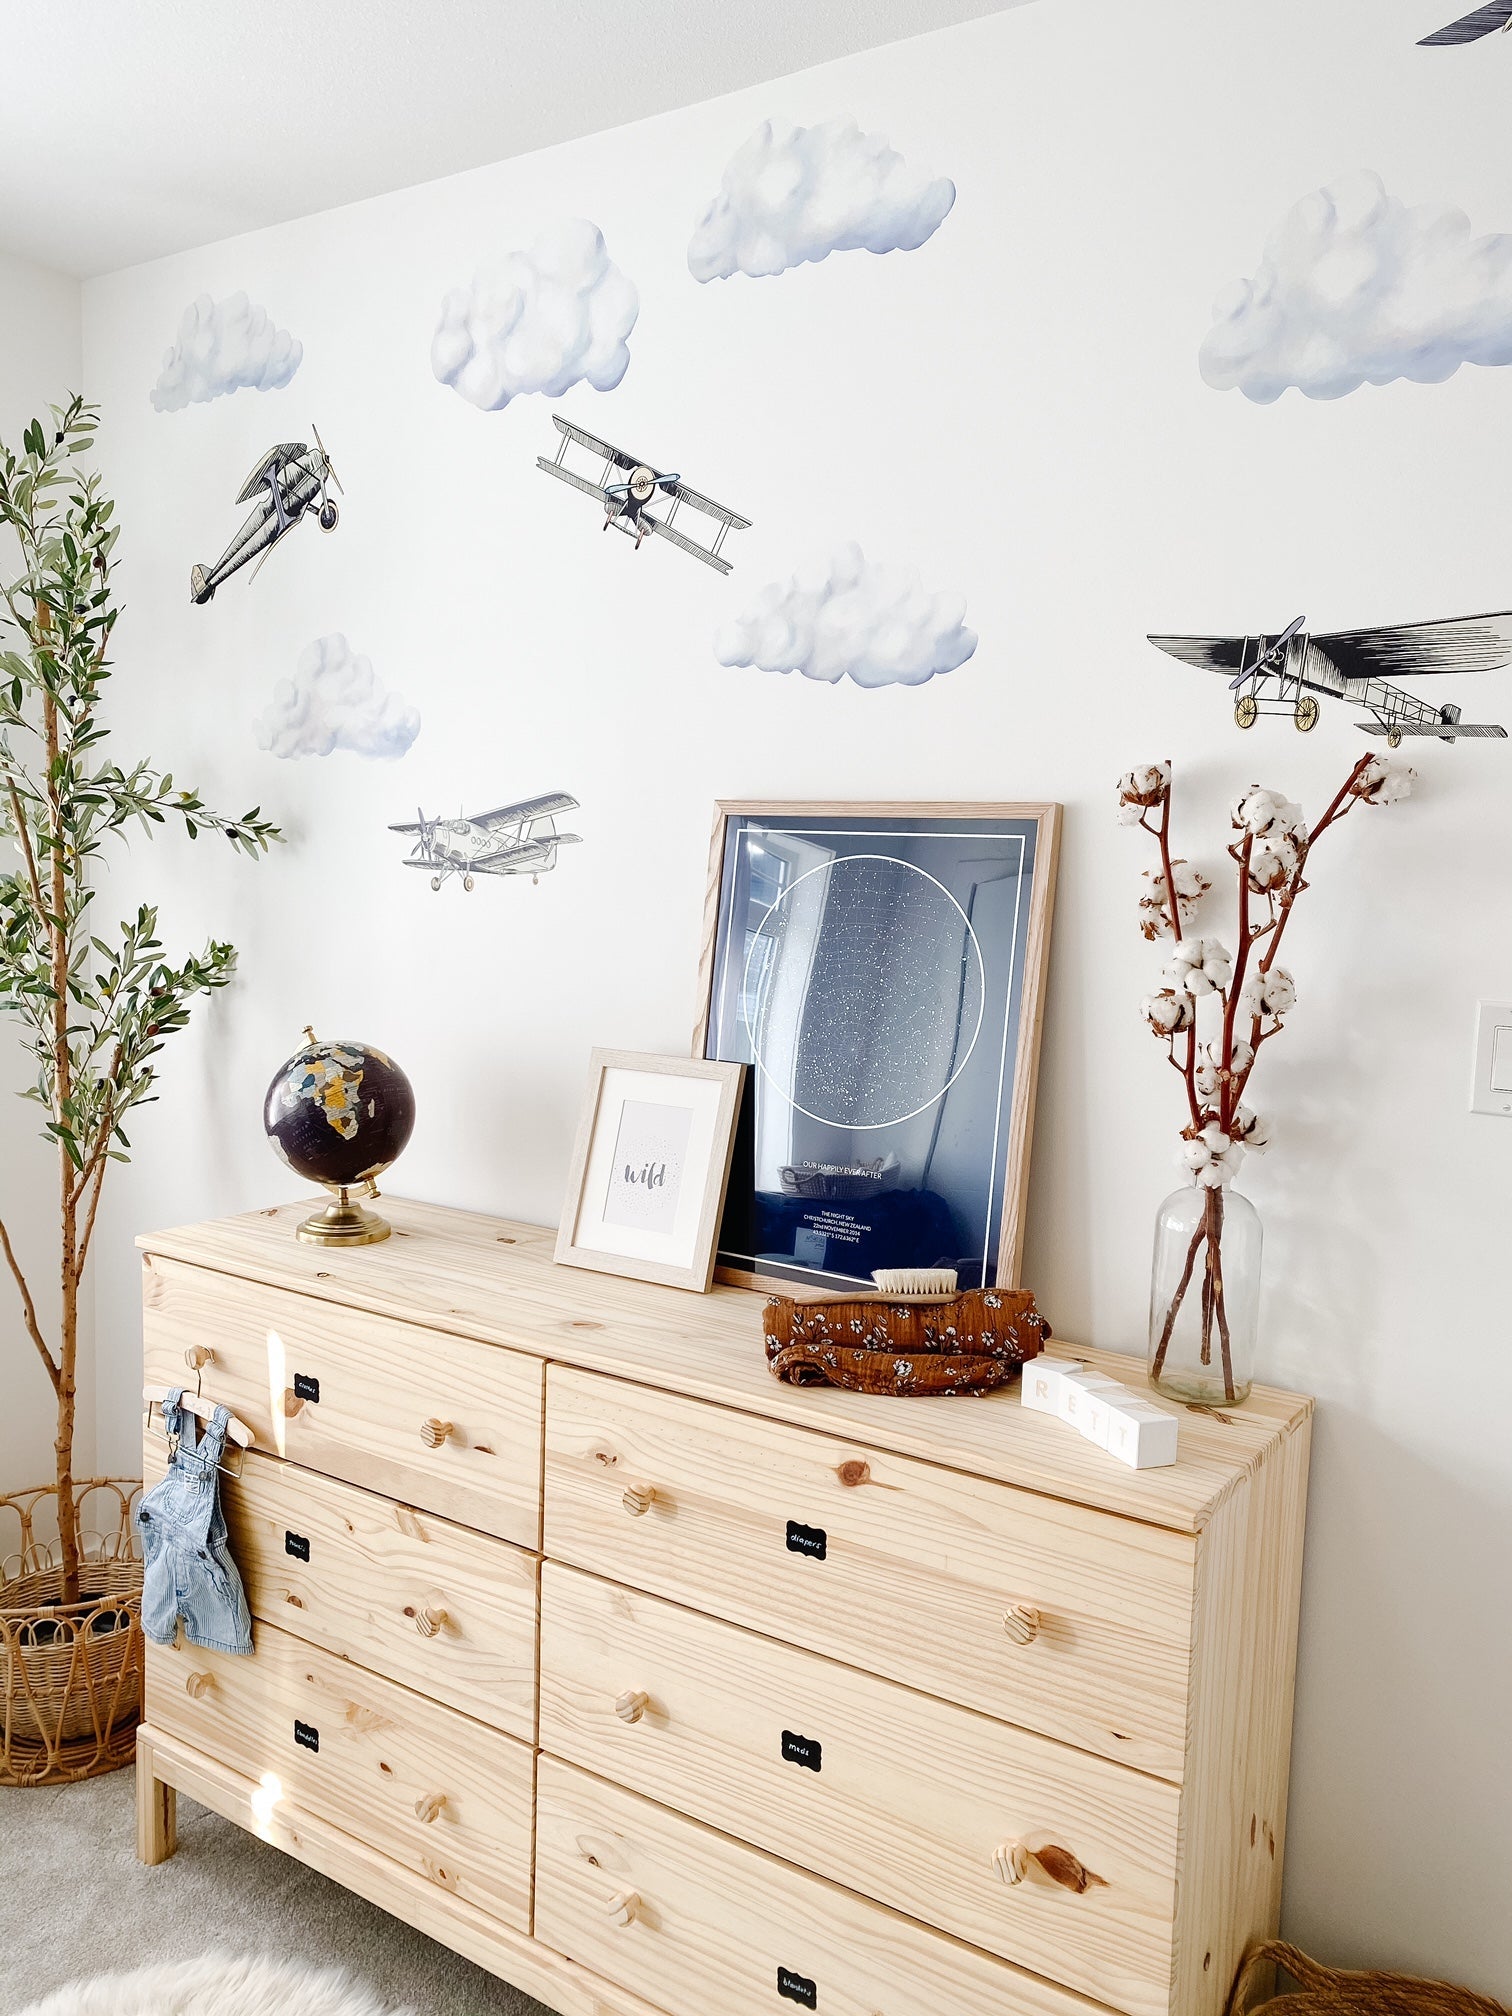 All That is Wright Airplane Decals, Kids Wall Decals, Rocky Mountain Decals